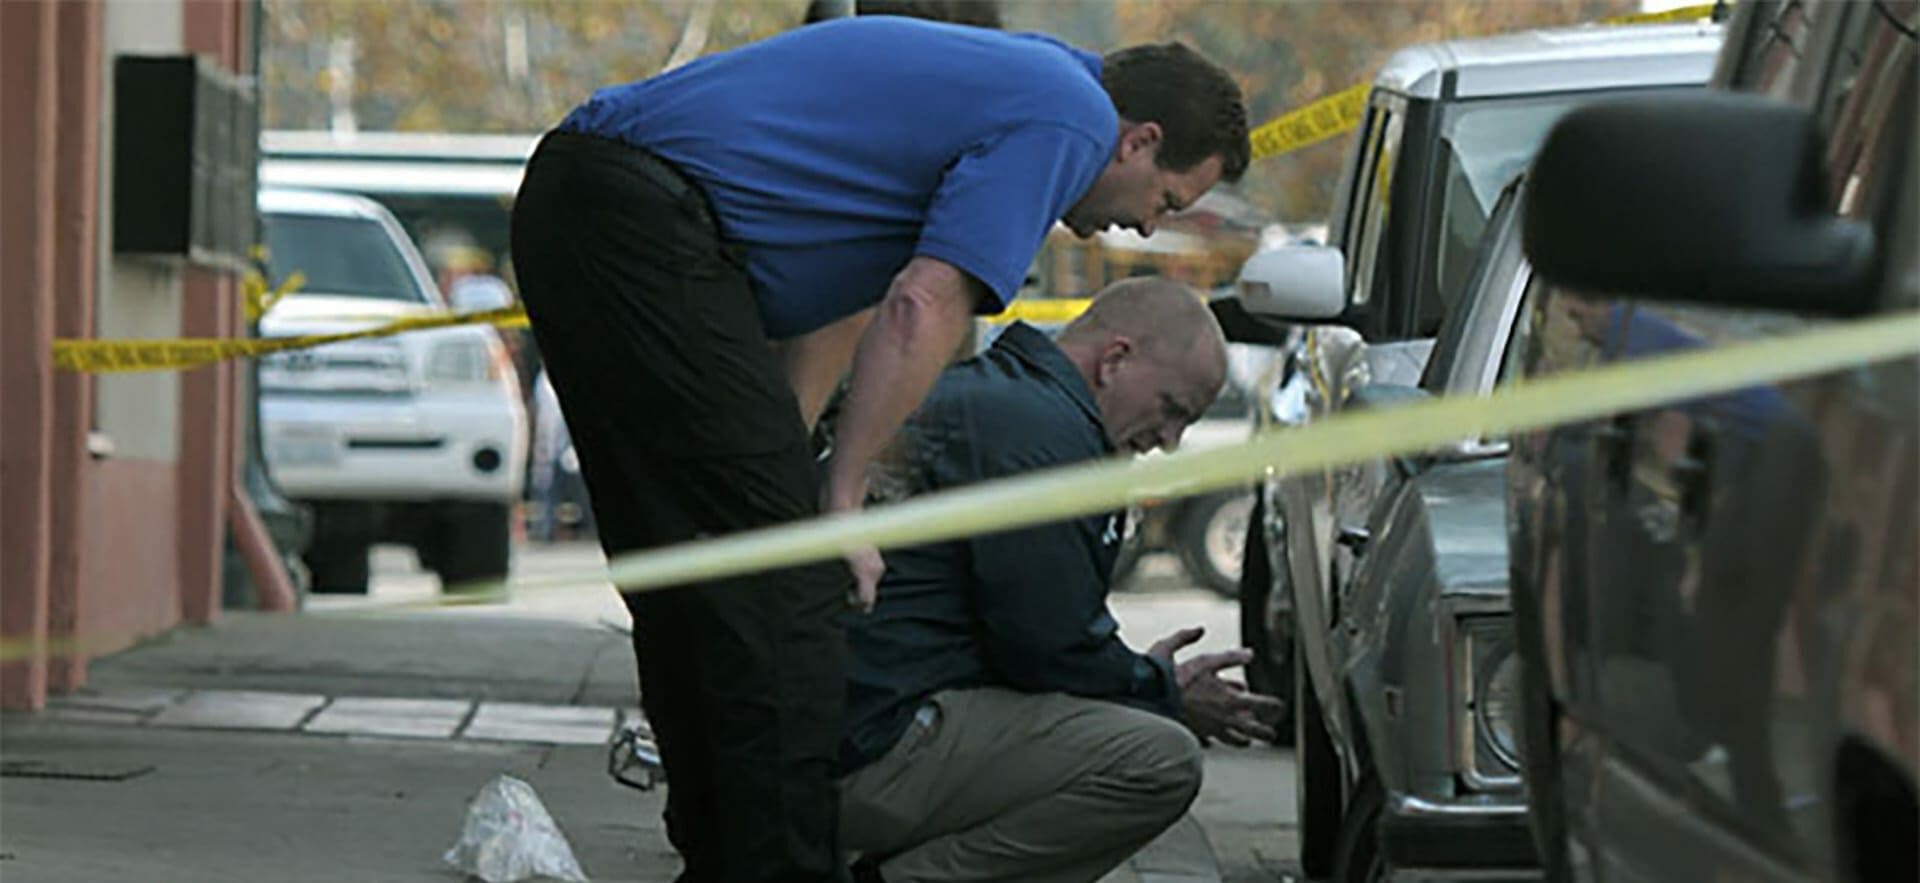 Mike Ullemeyer and Michael Claytor Investigating an active crime scene